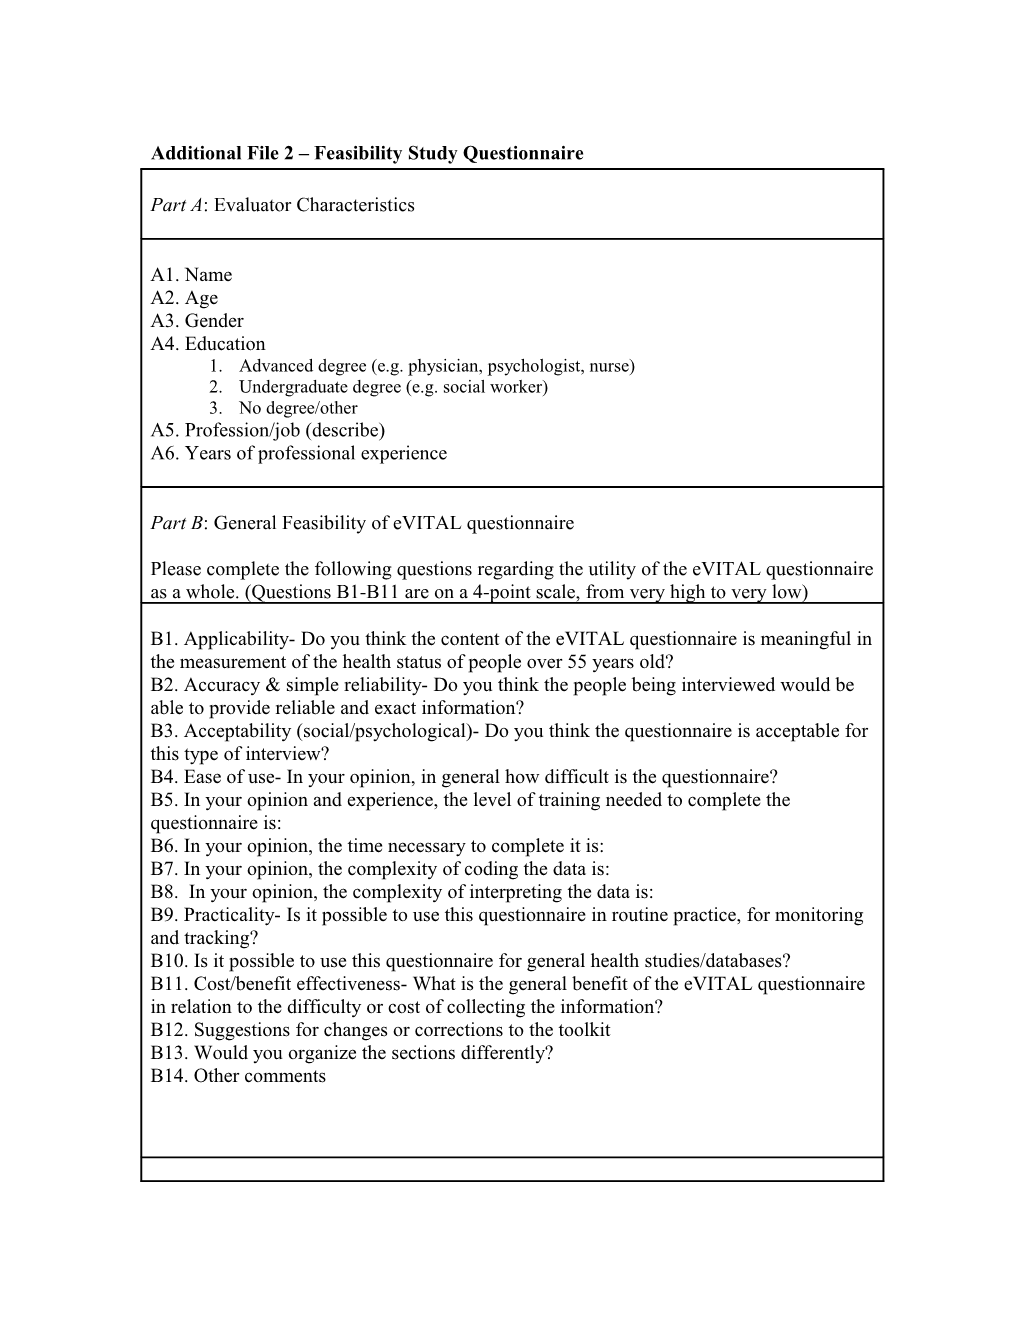 Additional File 2 Feasibility Study Questionnaire